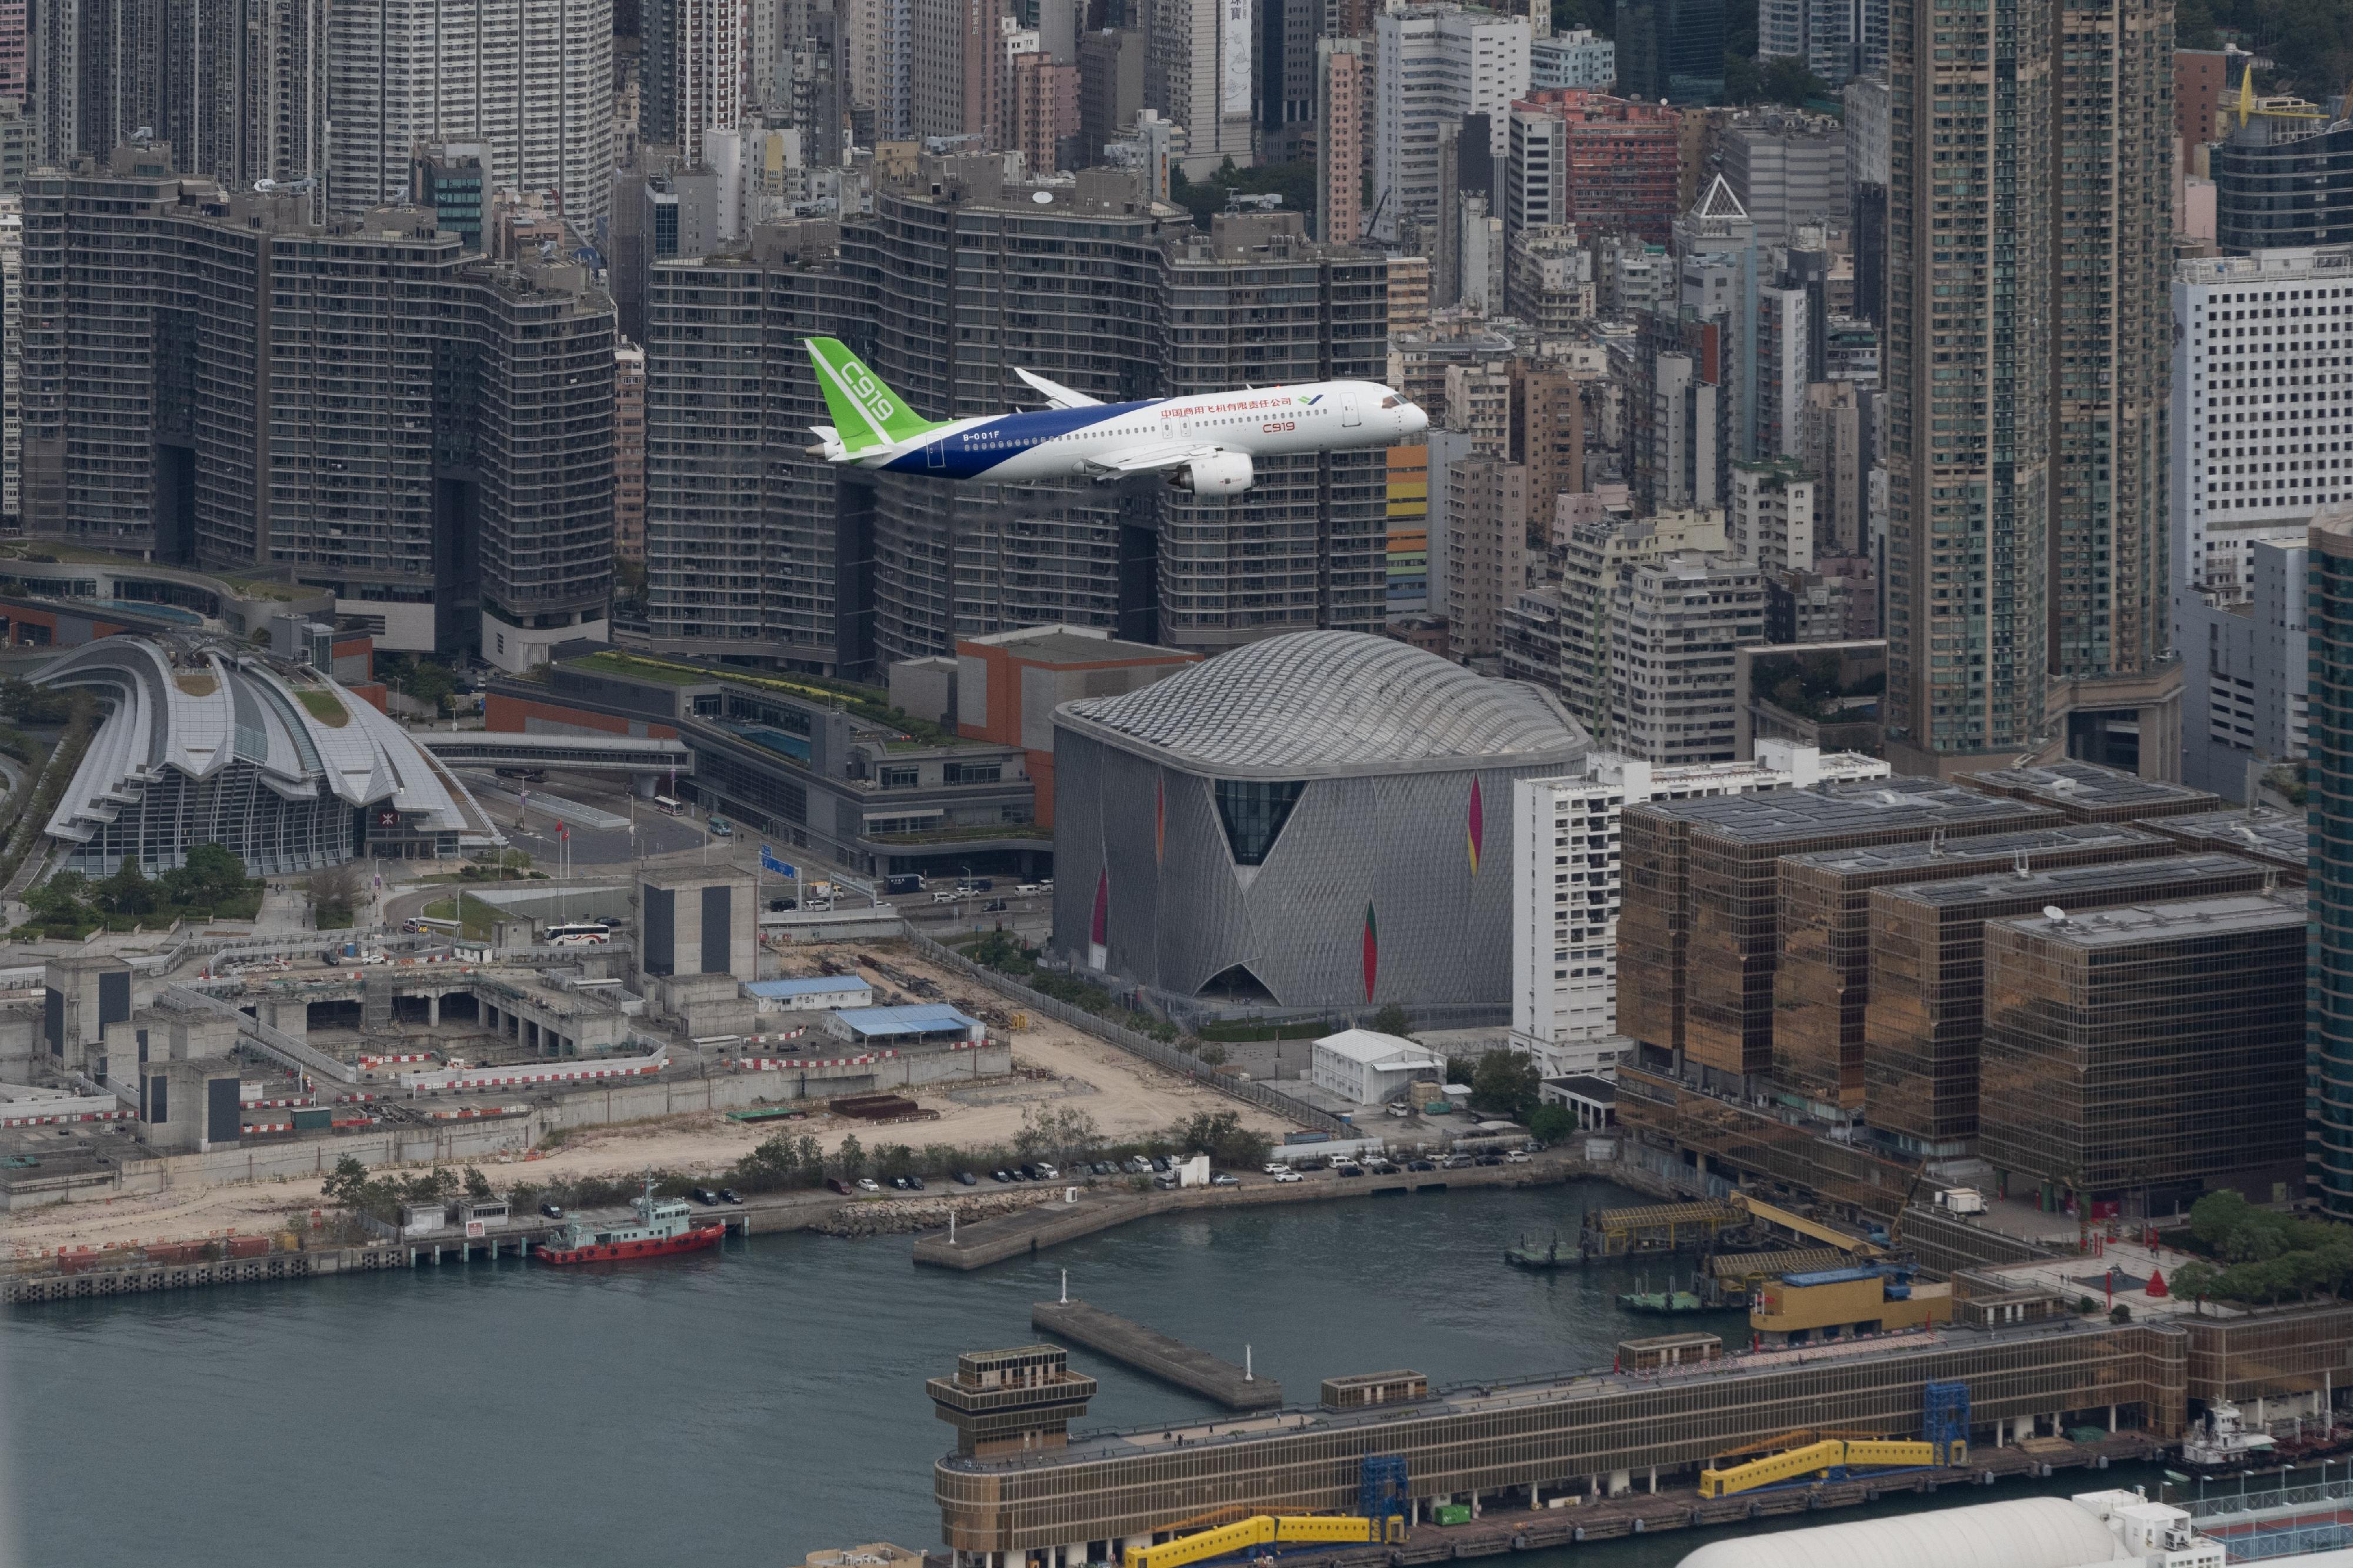 The flight demonstration of home-grown aircraft C919 concluded successfully this morning (December 16). Photo shows the C919 aircraft flying over Victoria Harbour.

